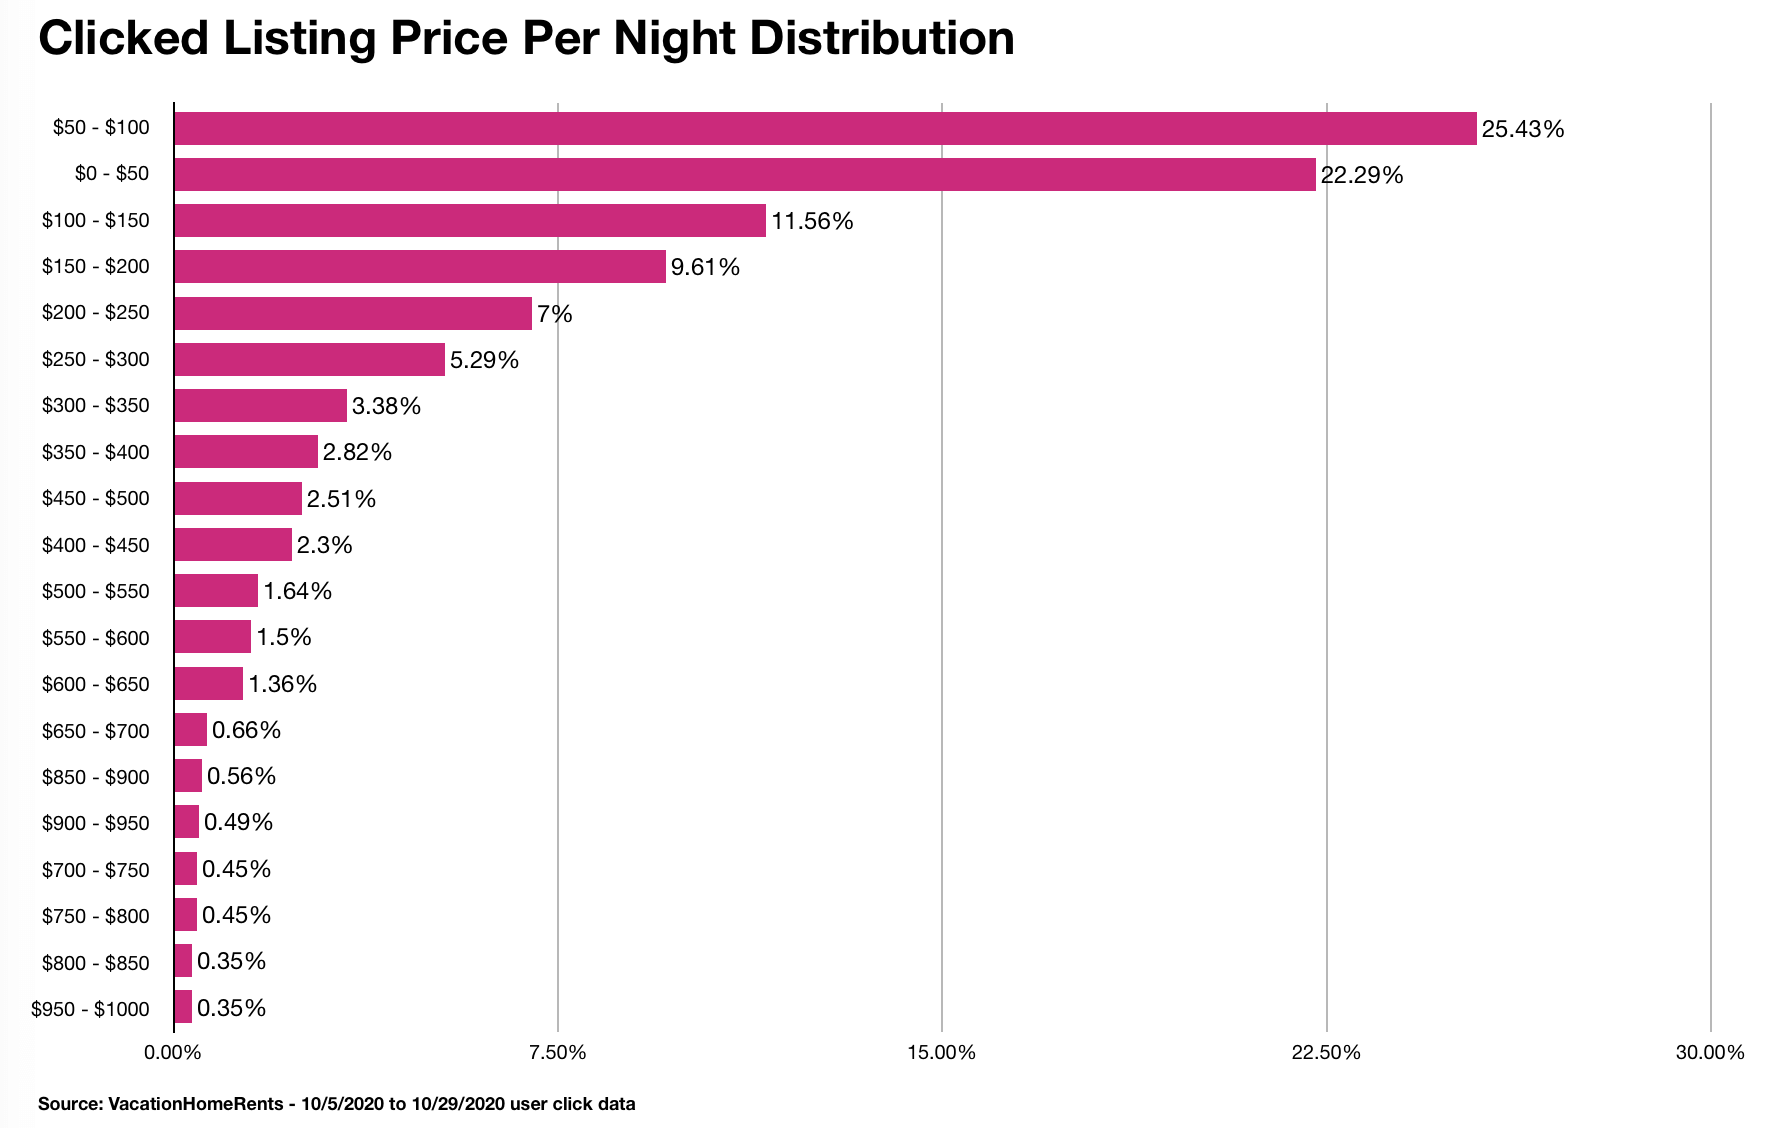 2020 Travel Trends Clicked Listing Price Per Night Distribution by VacationHomeRents.com